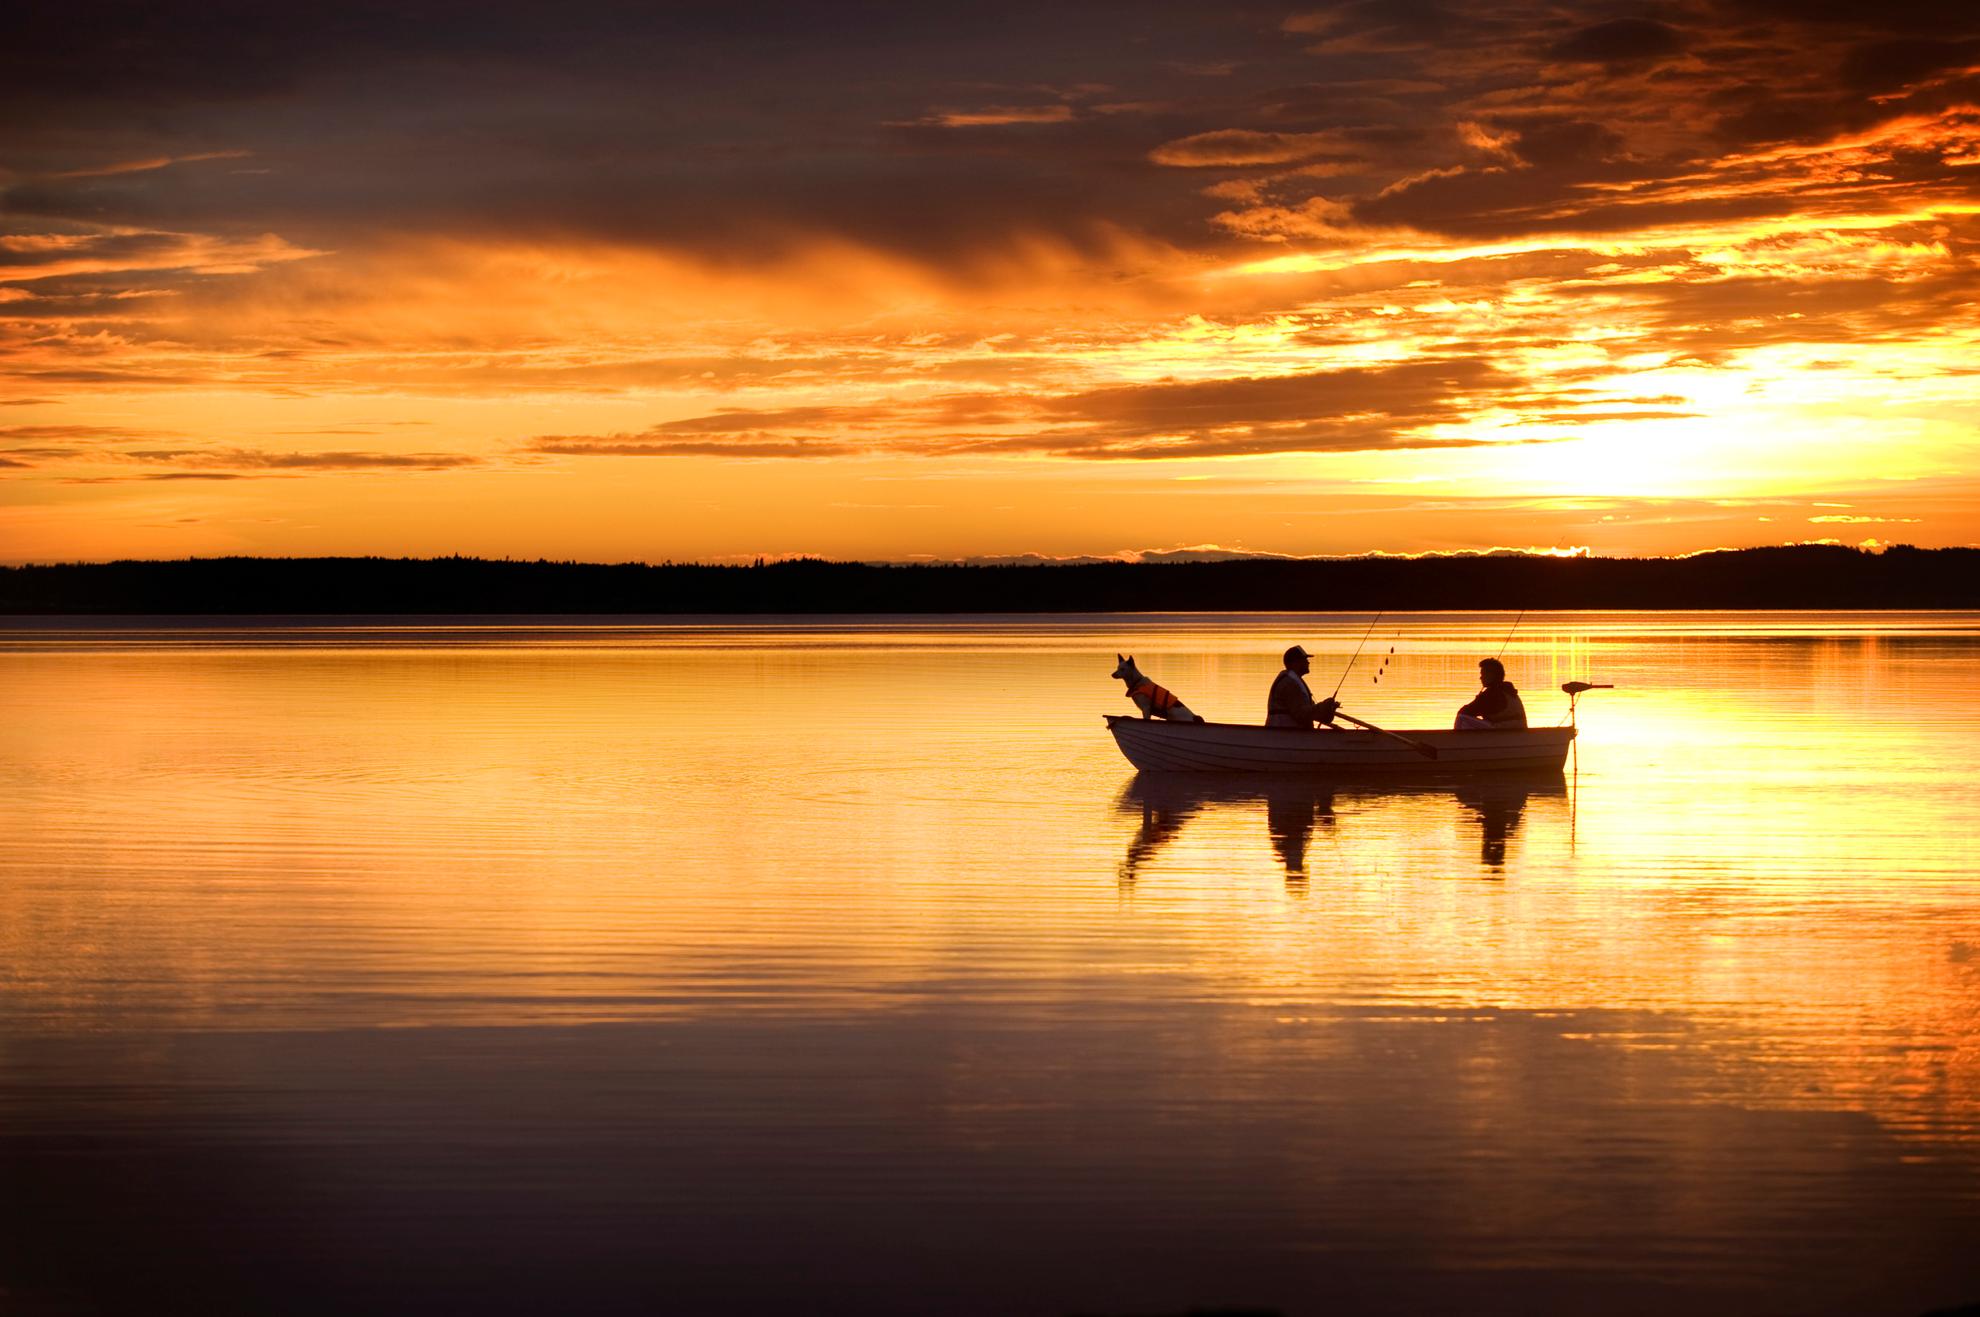 Two men and a dog in a small boat on a lake are fishing in the midnight sun. The orange sky is reflecting in the lake.